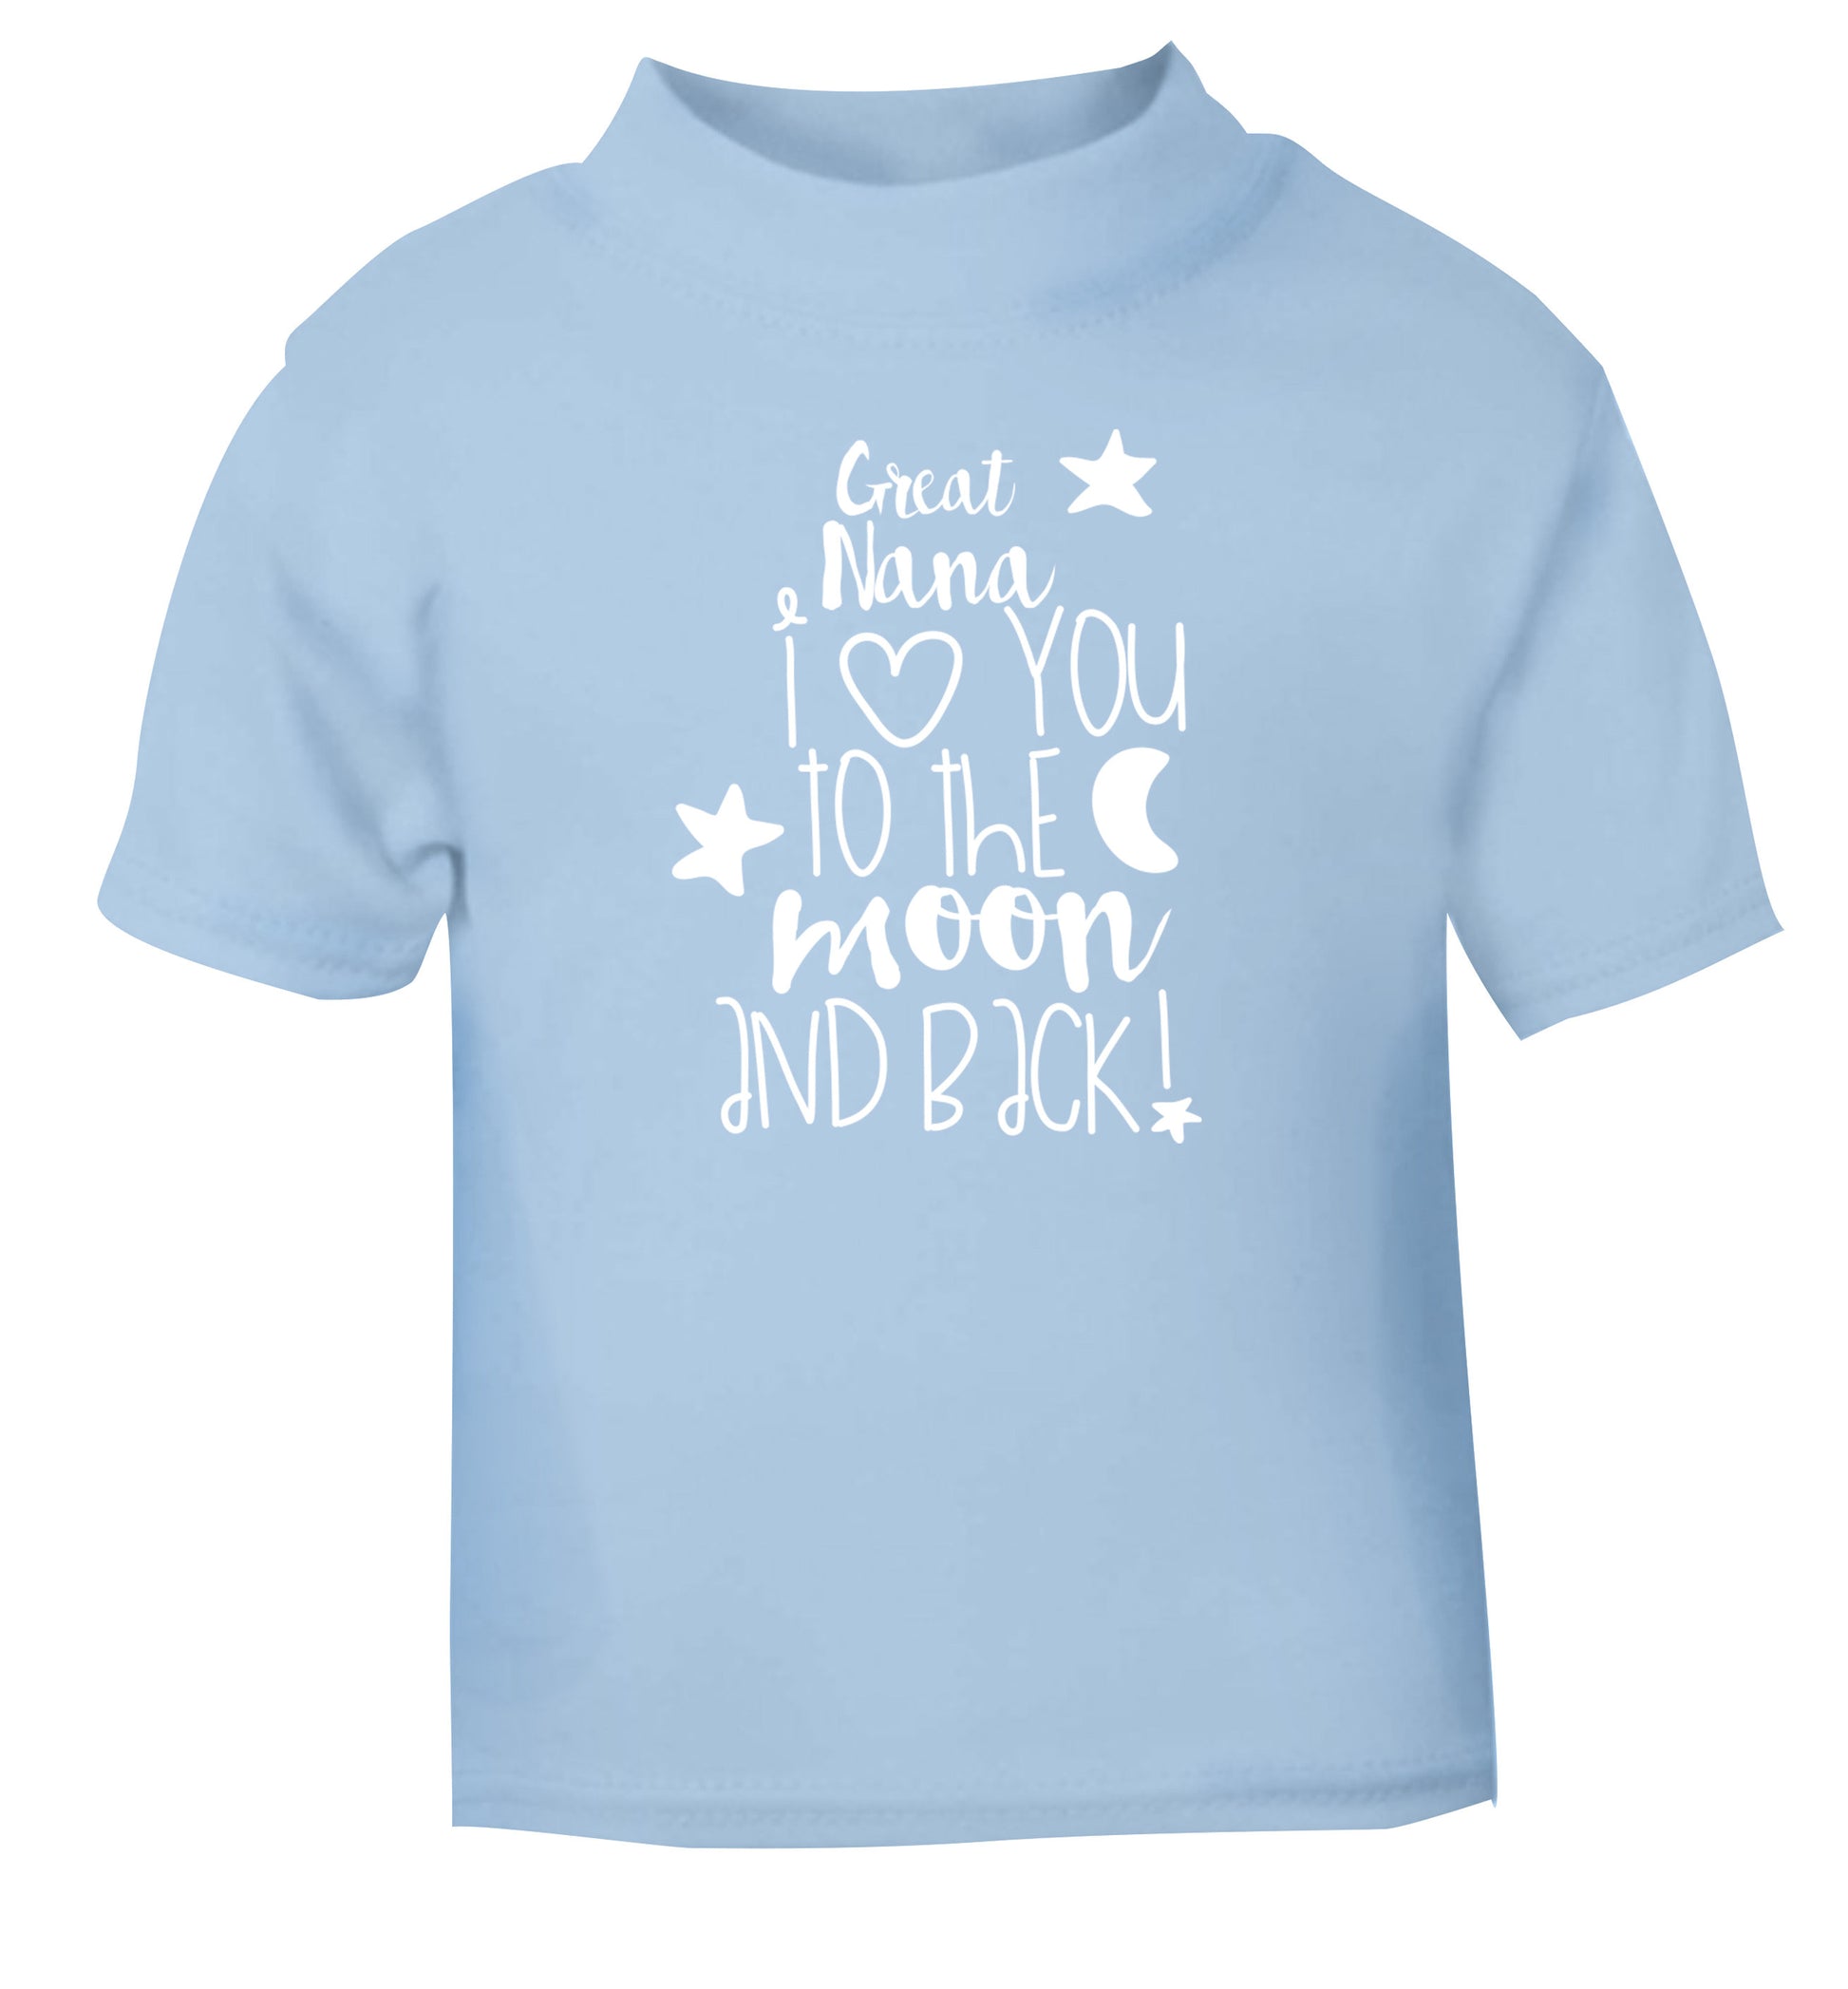 Great Nana I love you to the moon and back light blue Baby Toddler Tshirt 2 Years